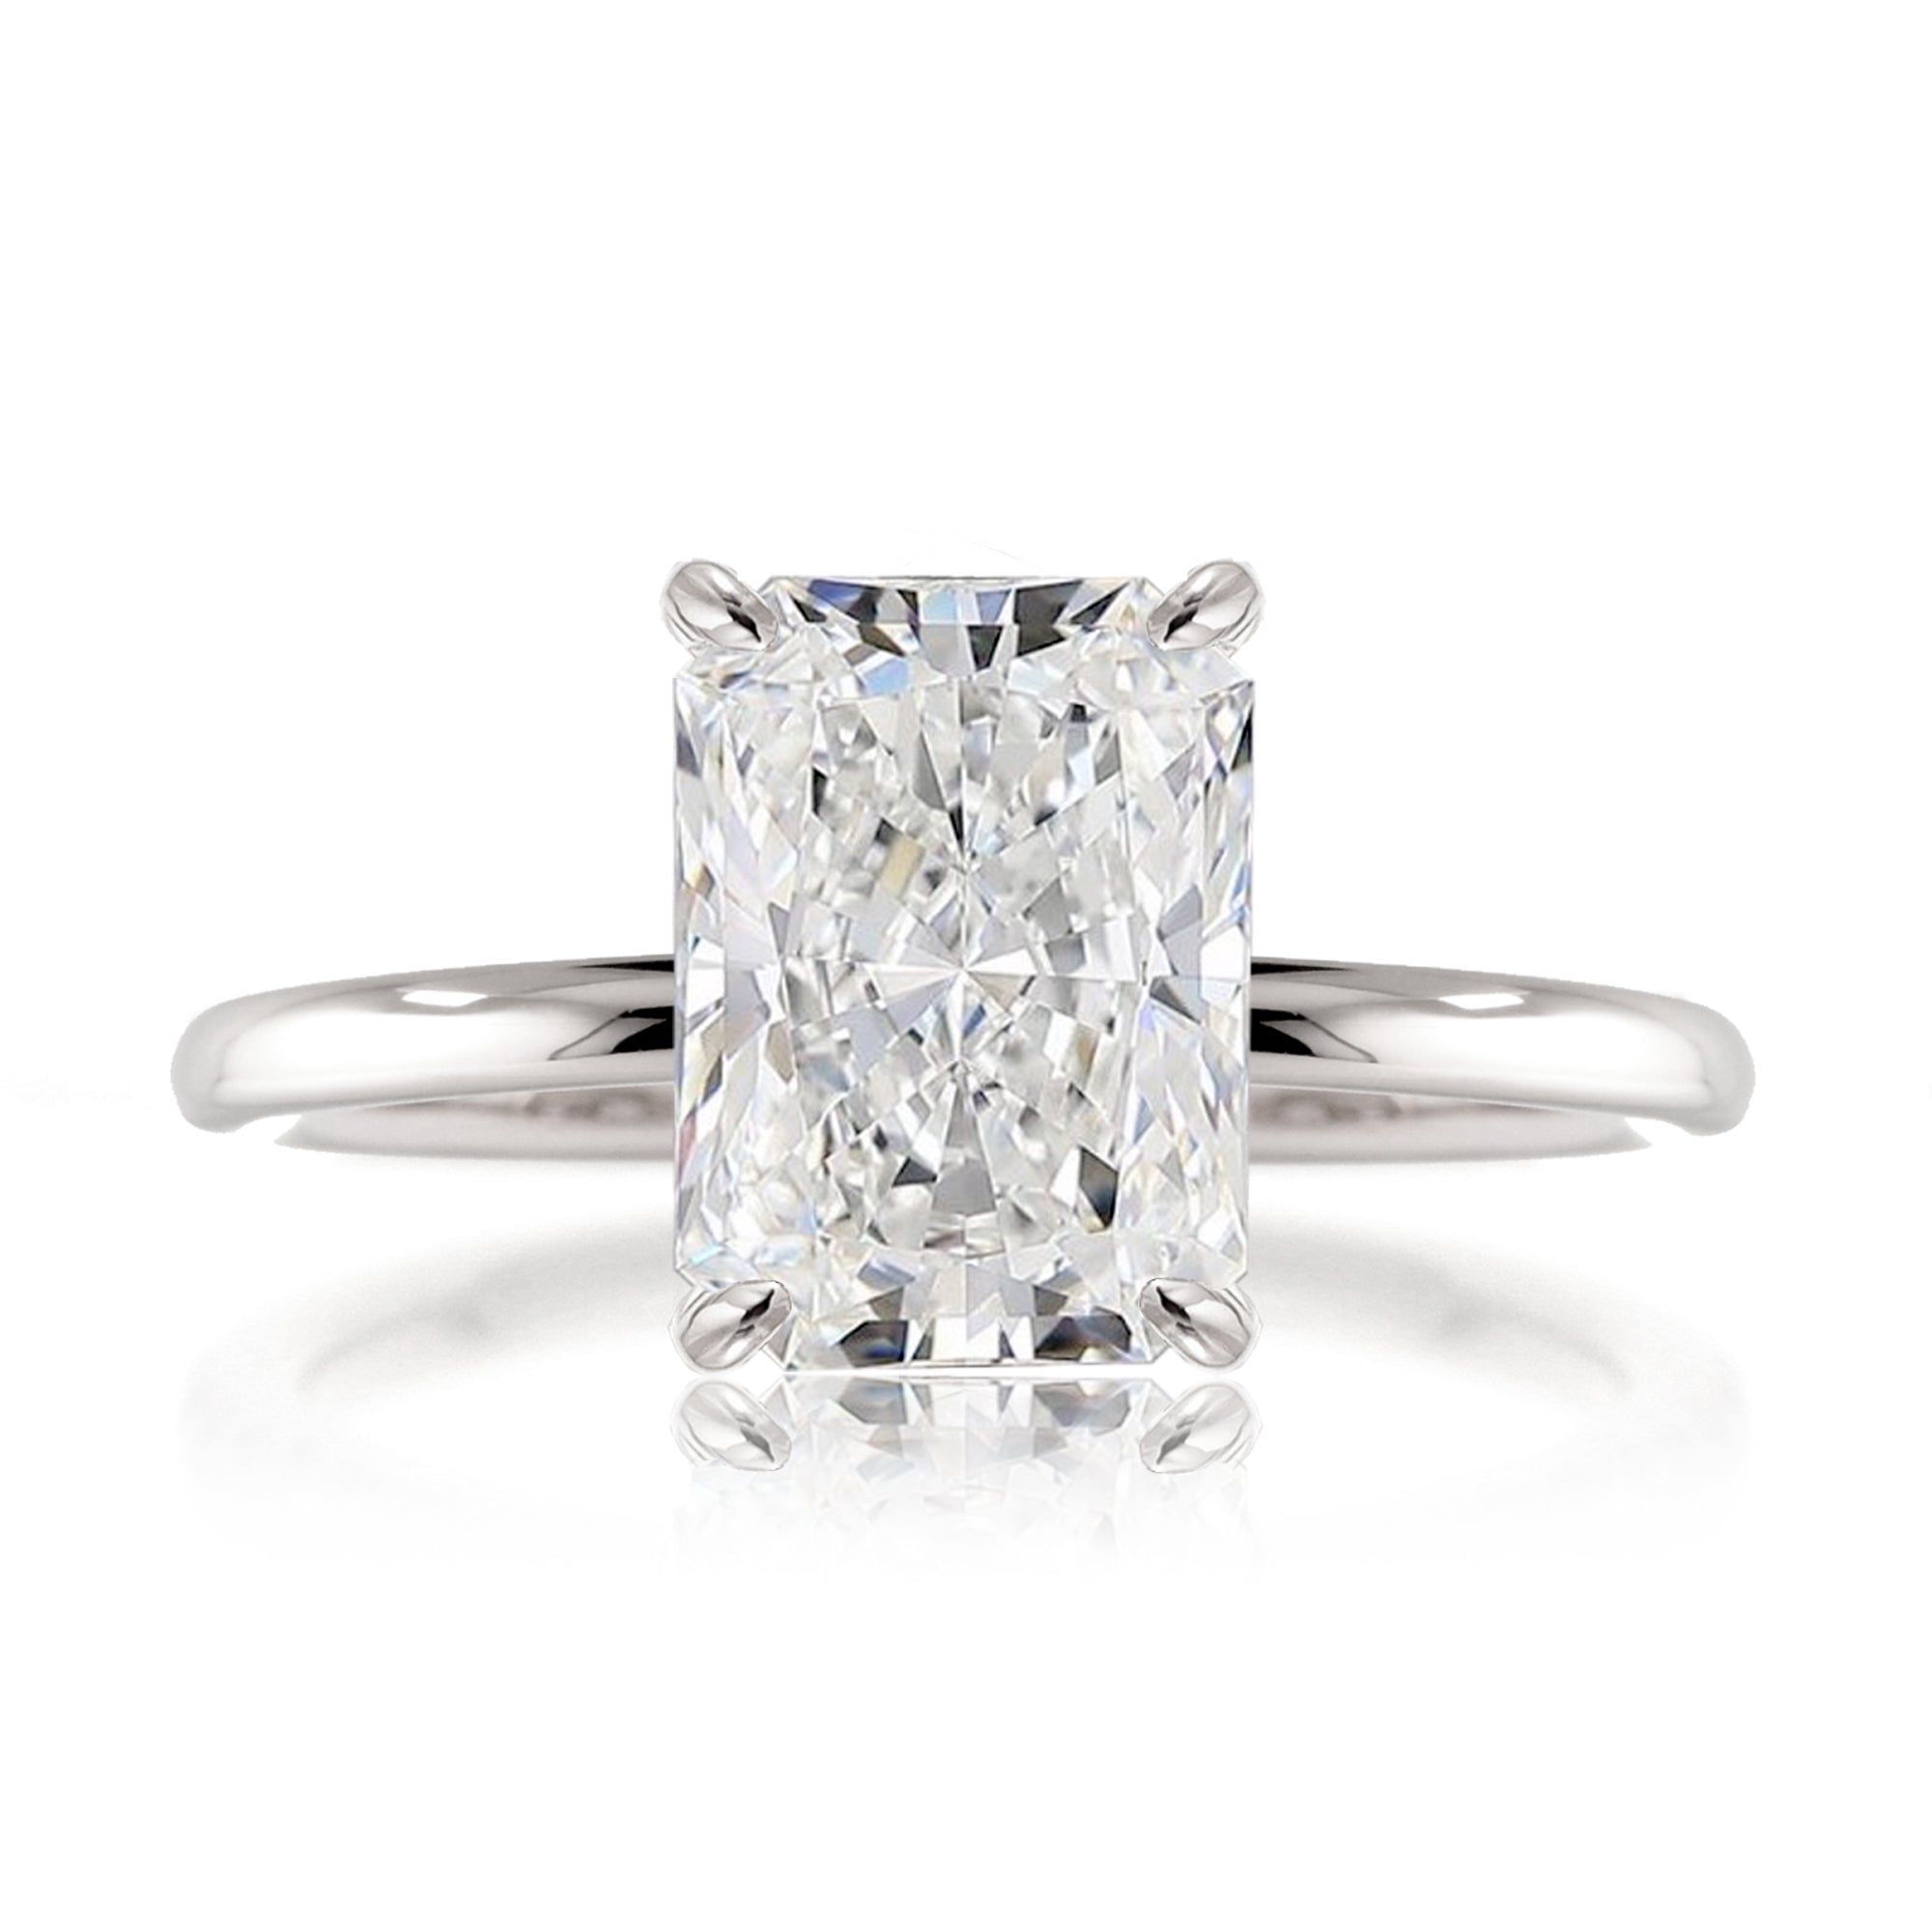 Radiant cut lab-grown diamond engagement ring white gold - The Ava solid band